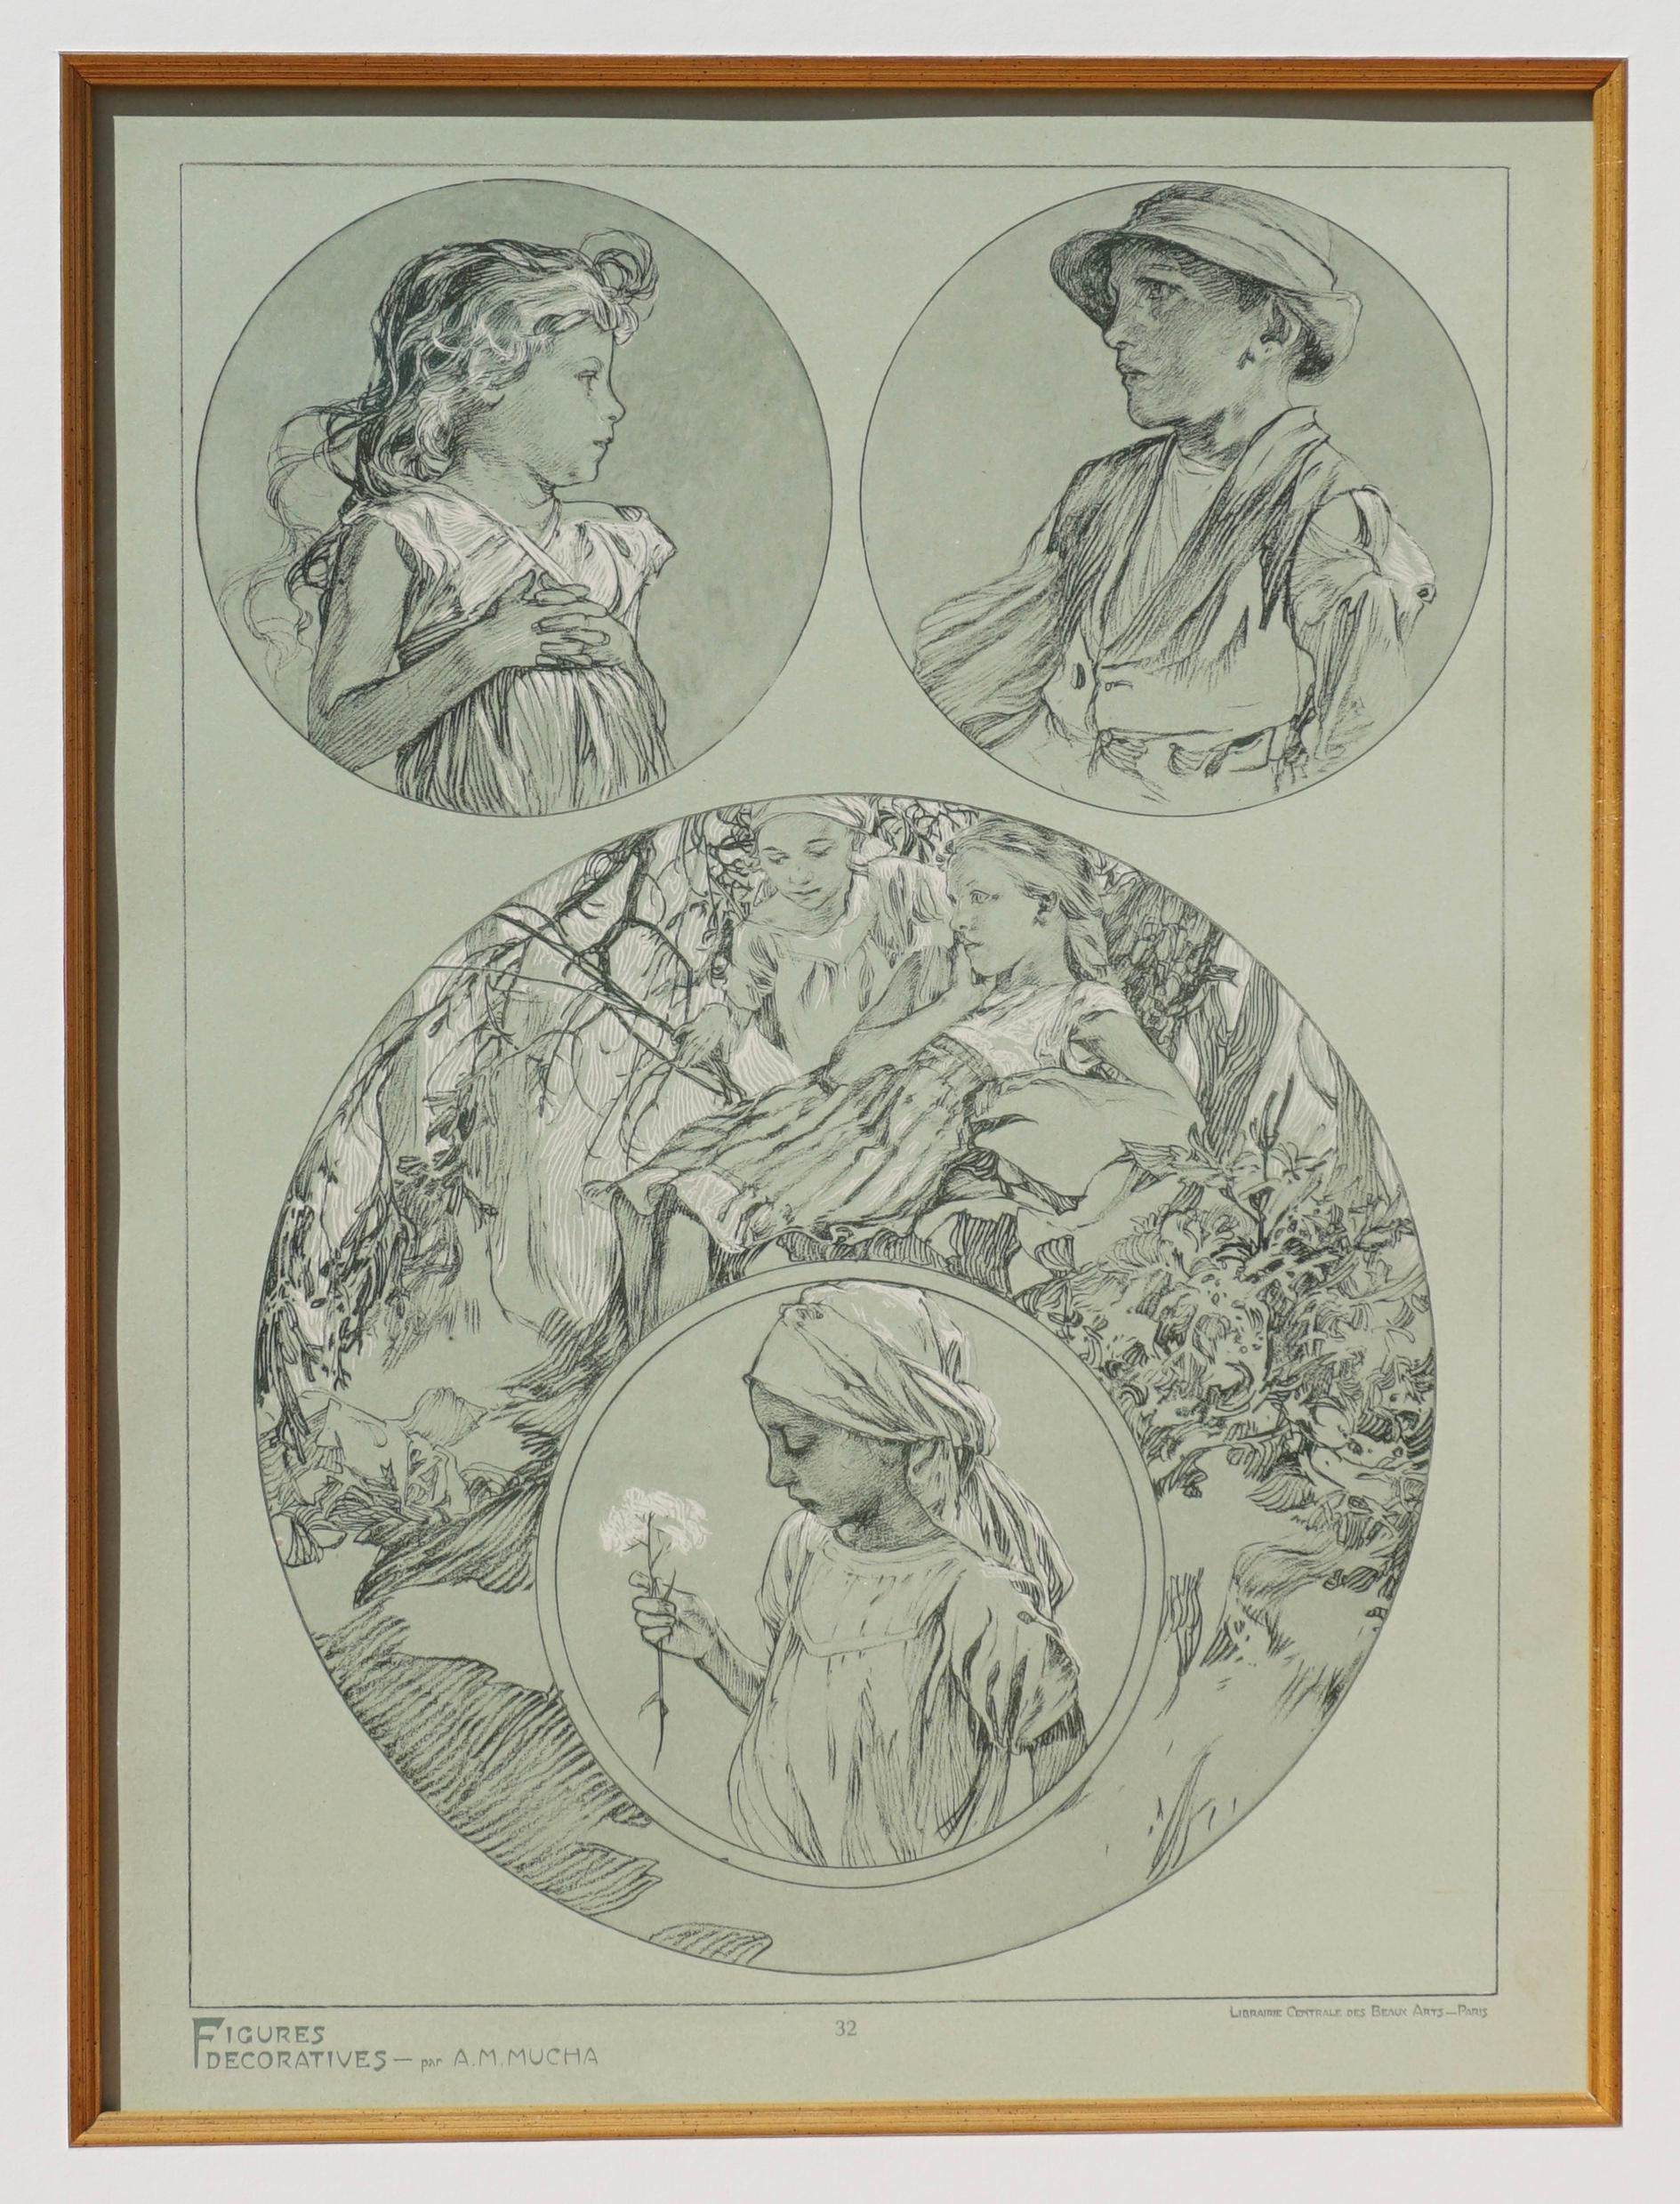 A framed Art Nouveau poster by Alphone Mucha from 1905 representing Muchas sketched designs of nudes, girls and boys in blacks, whites on green velem paper. Plate 32. 

Figures Decoratives par A. M. Mucha, PARIS Librairie Centrale des Beaux-Arts,